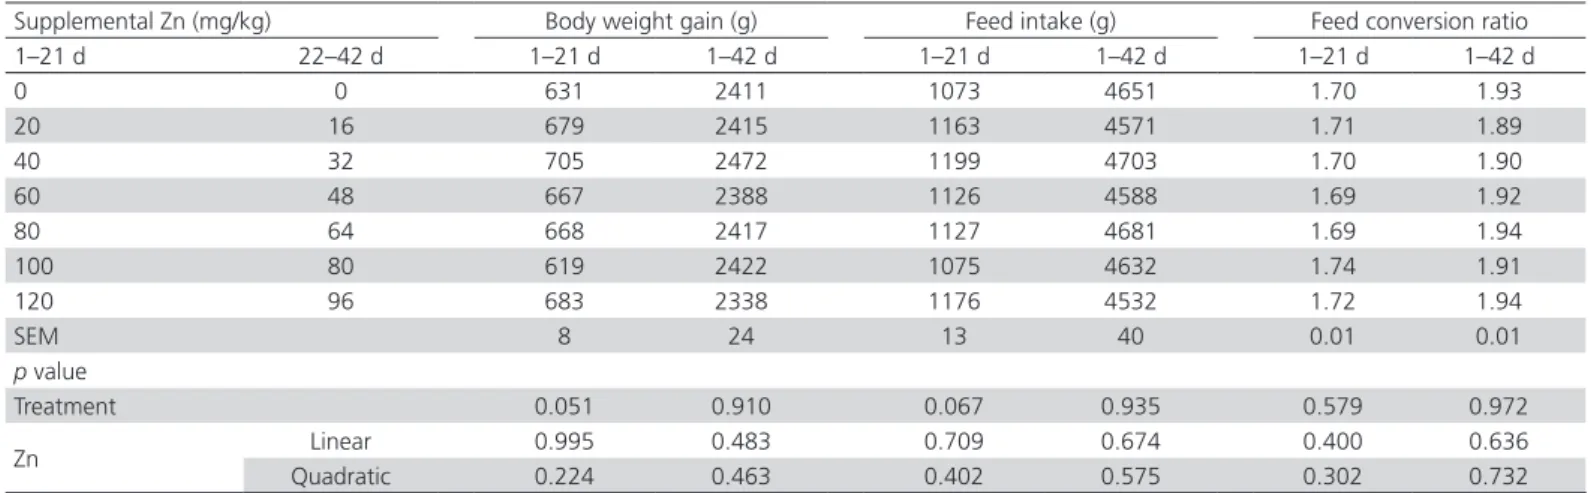 Table 3 – Effects of supplemental Zn levels on the growth performance of broiler chickens.